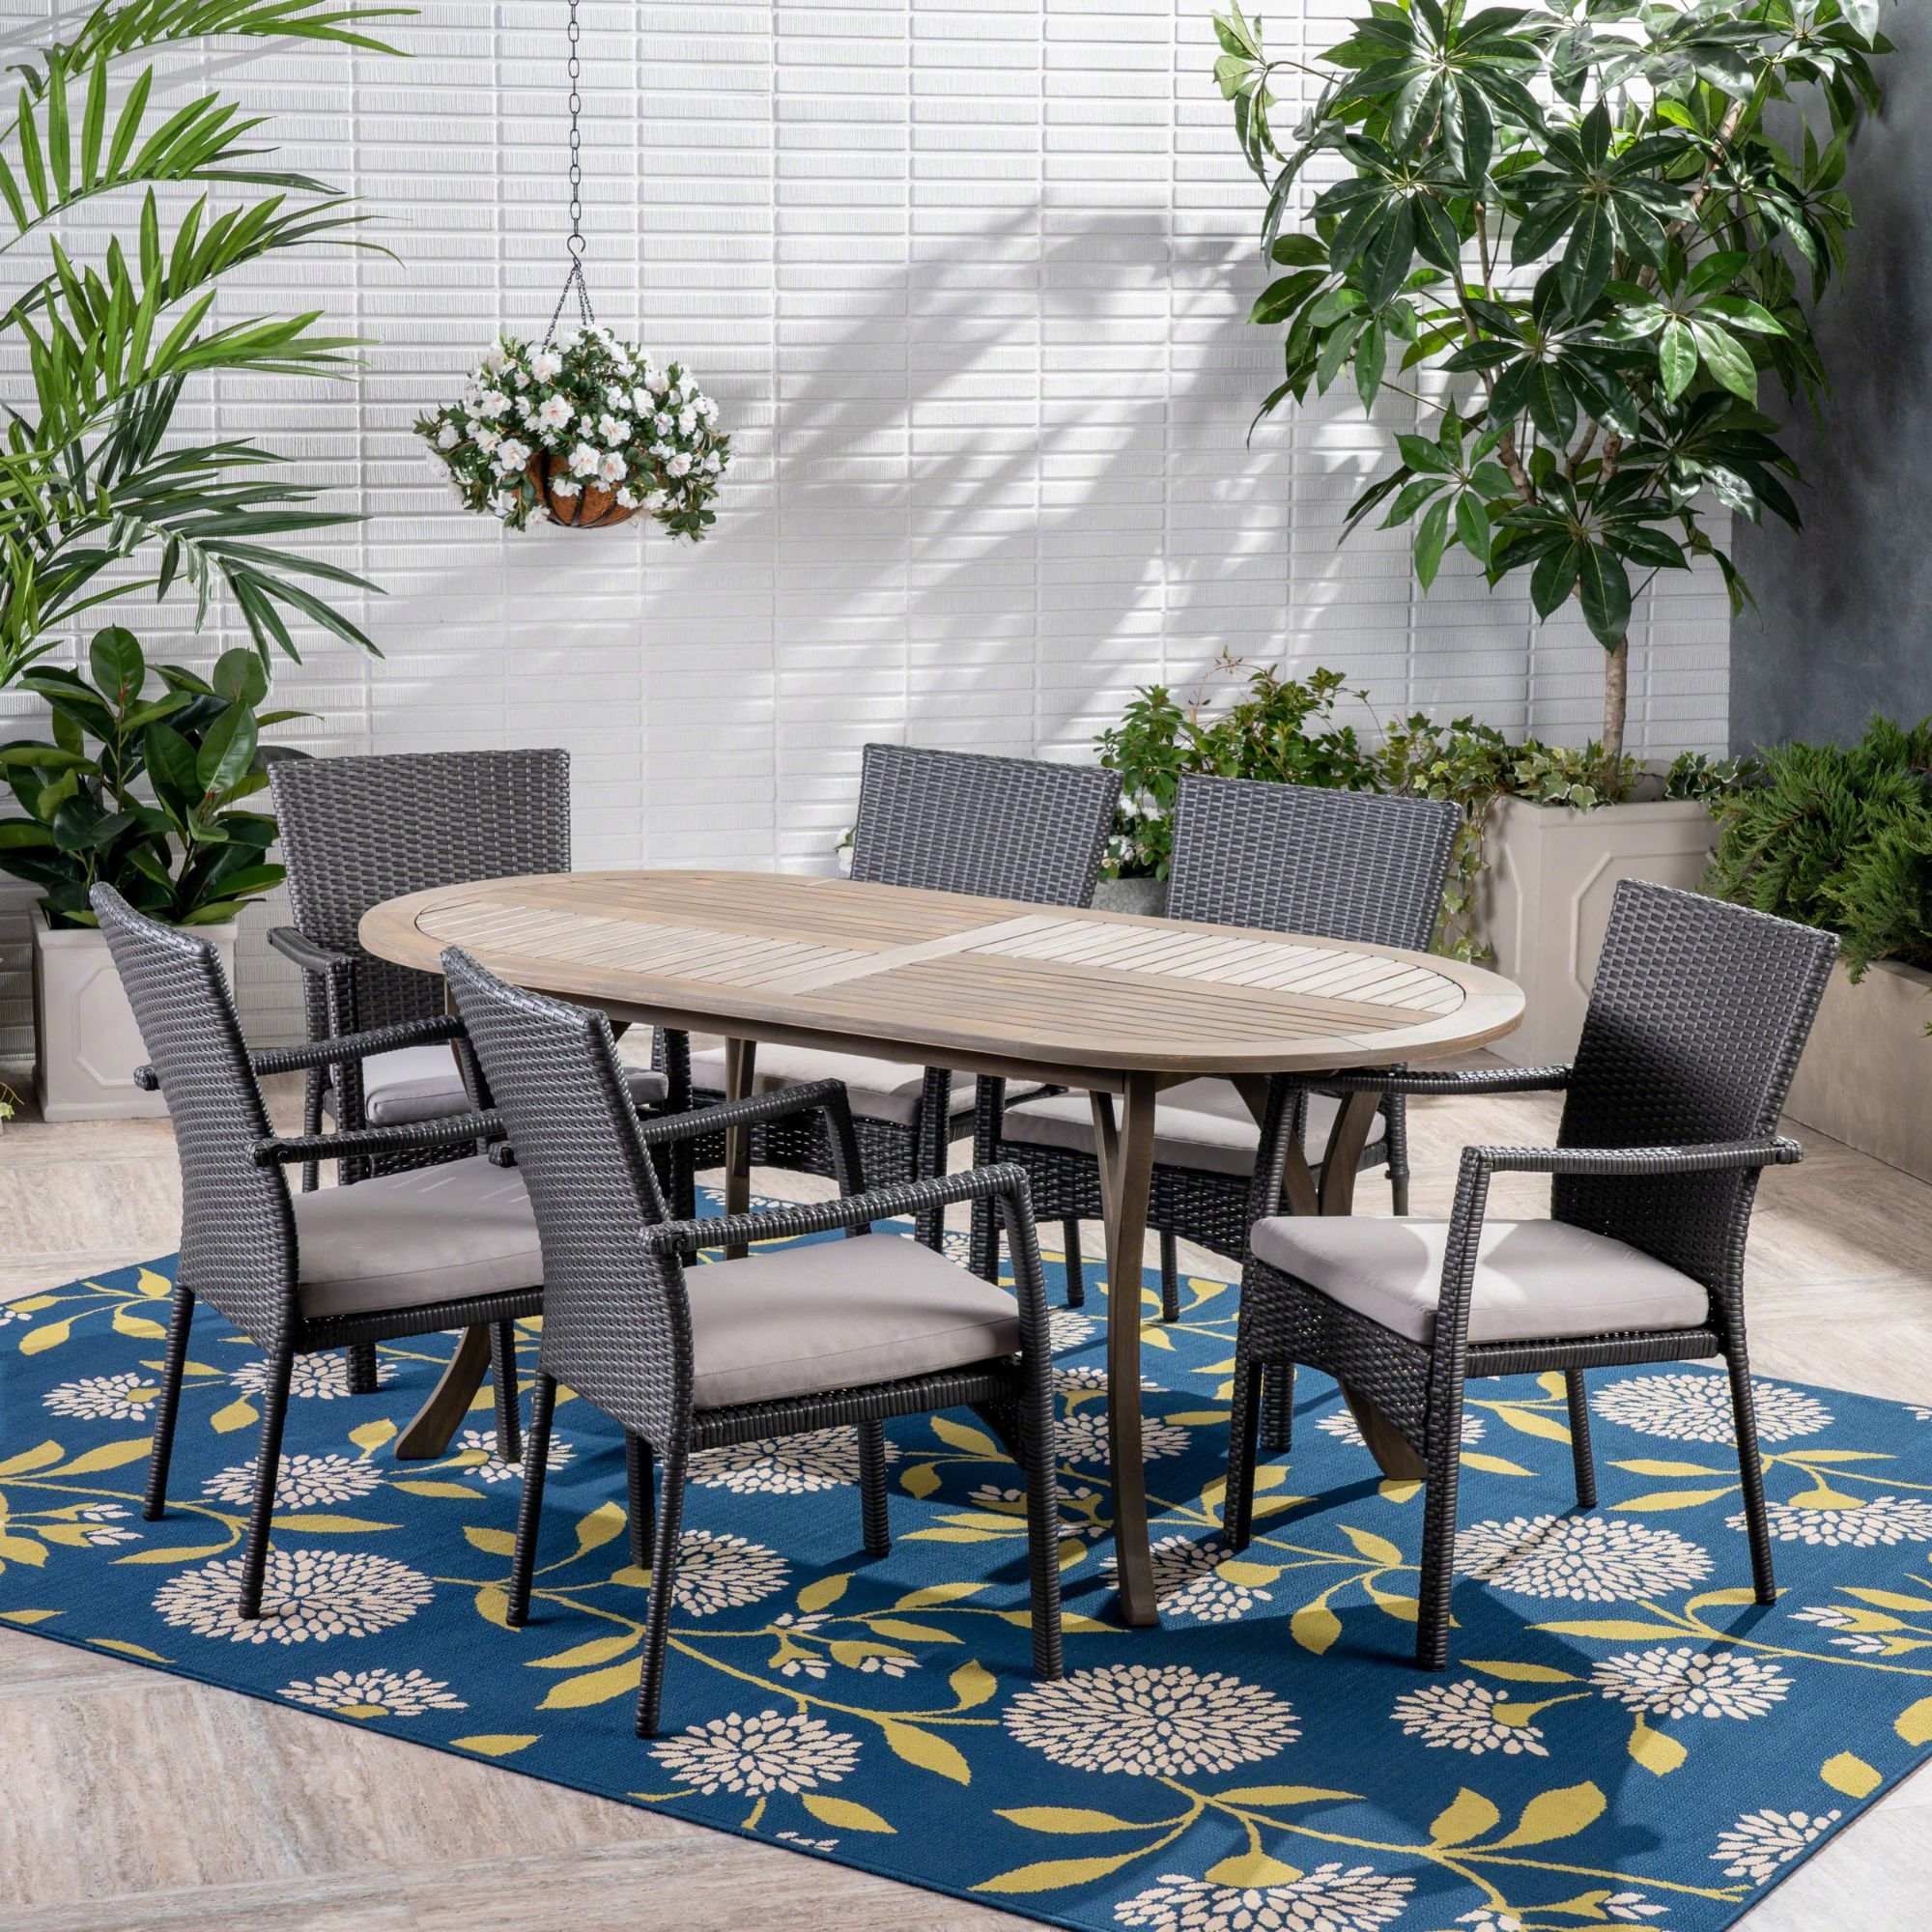 Current 7 Piece Patio Dining Sets Within 7 Piece Contemporary Outdoor Furniture Patio Dining Set – Gray Cushions (View 5 of 15)